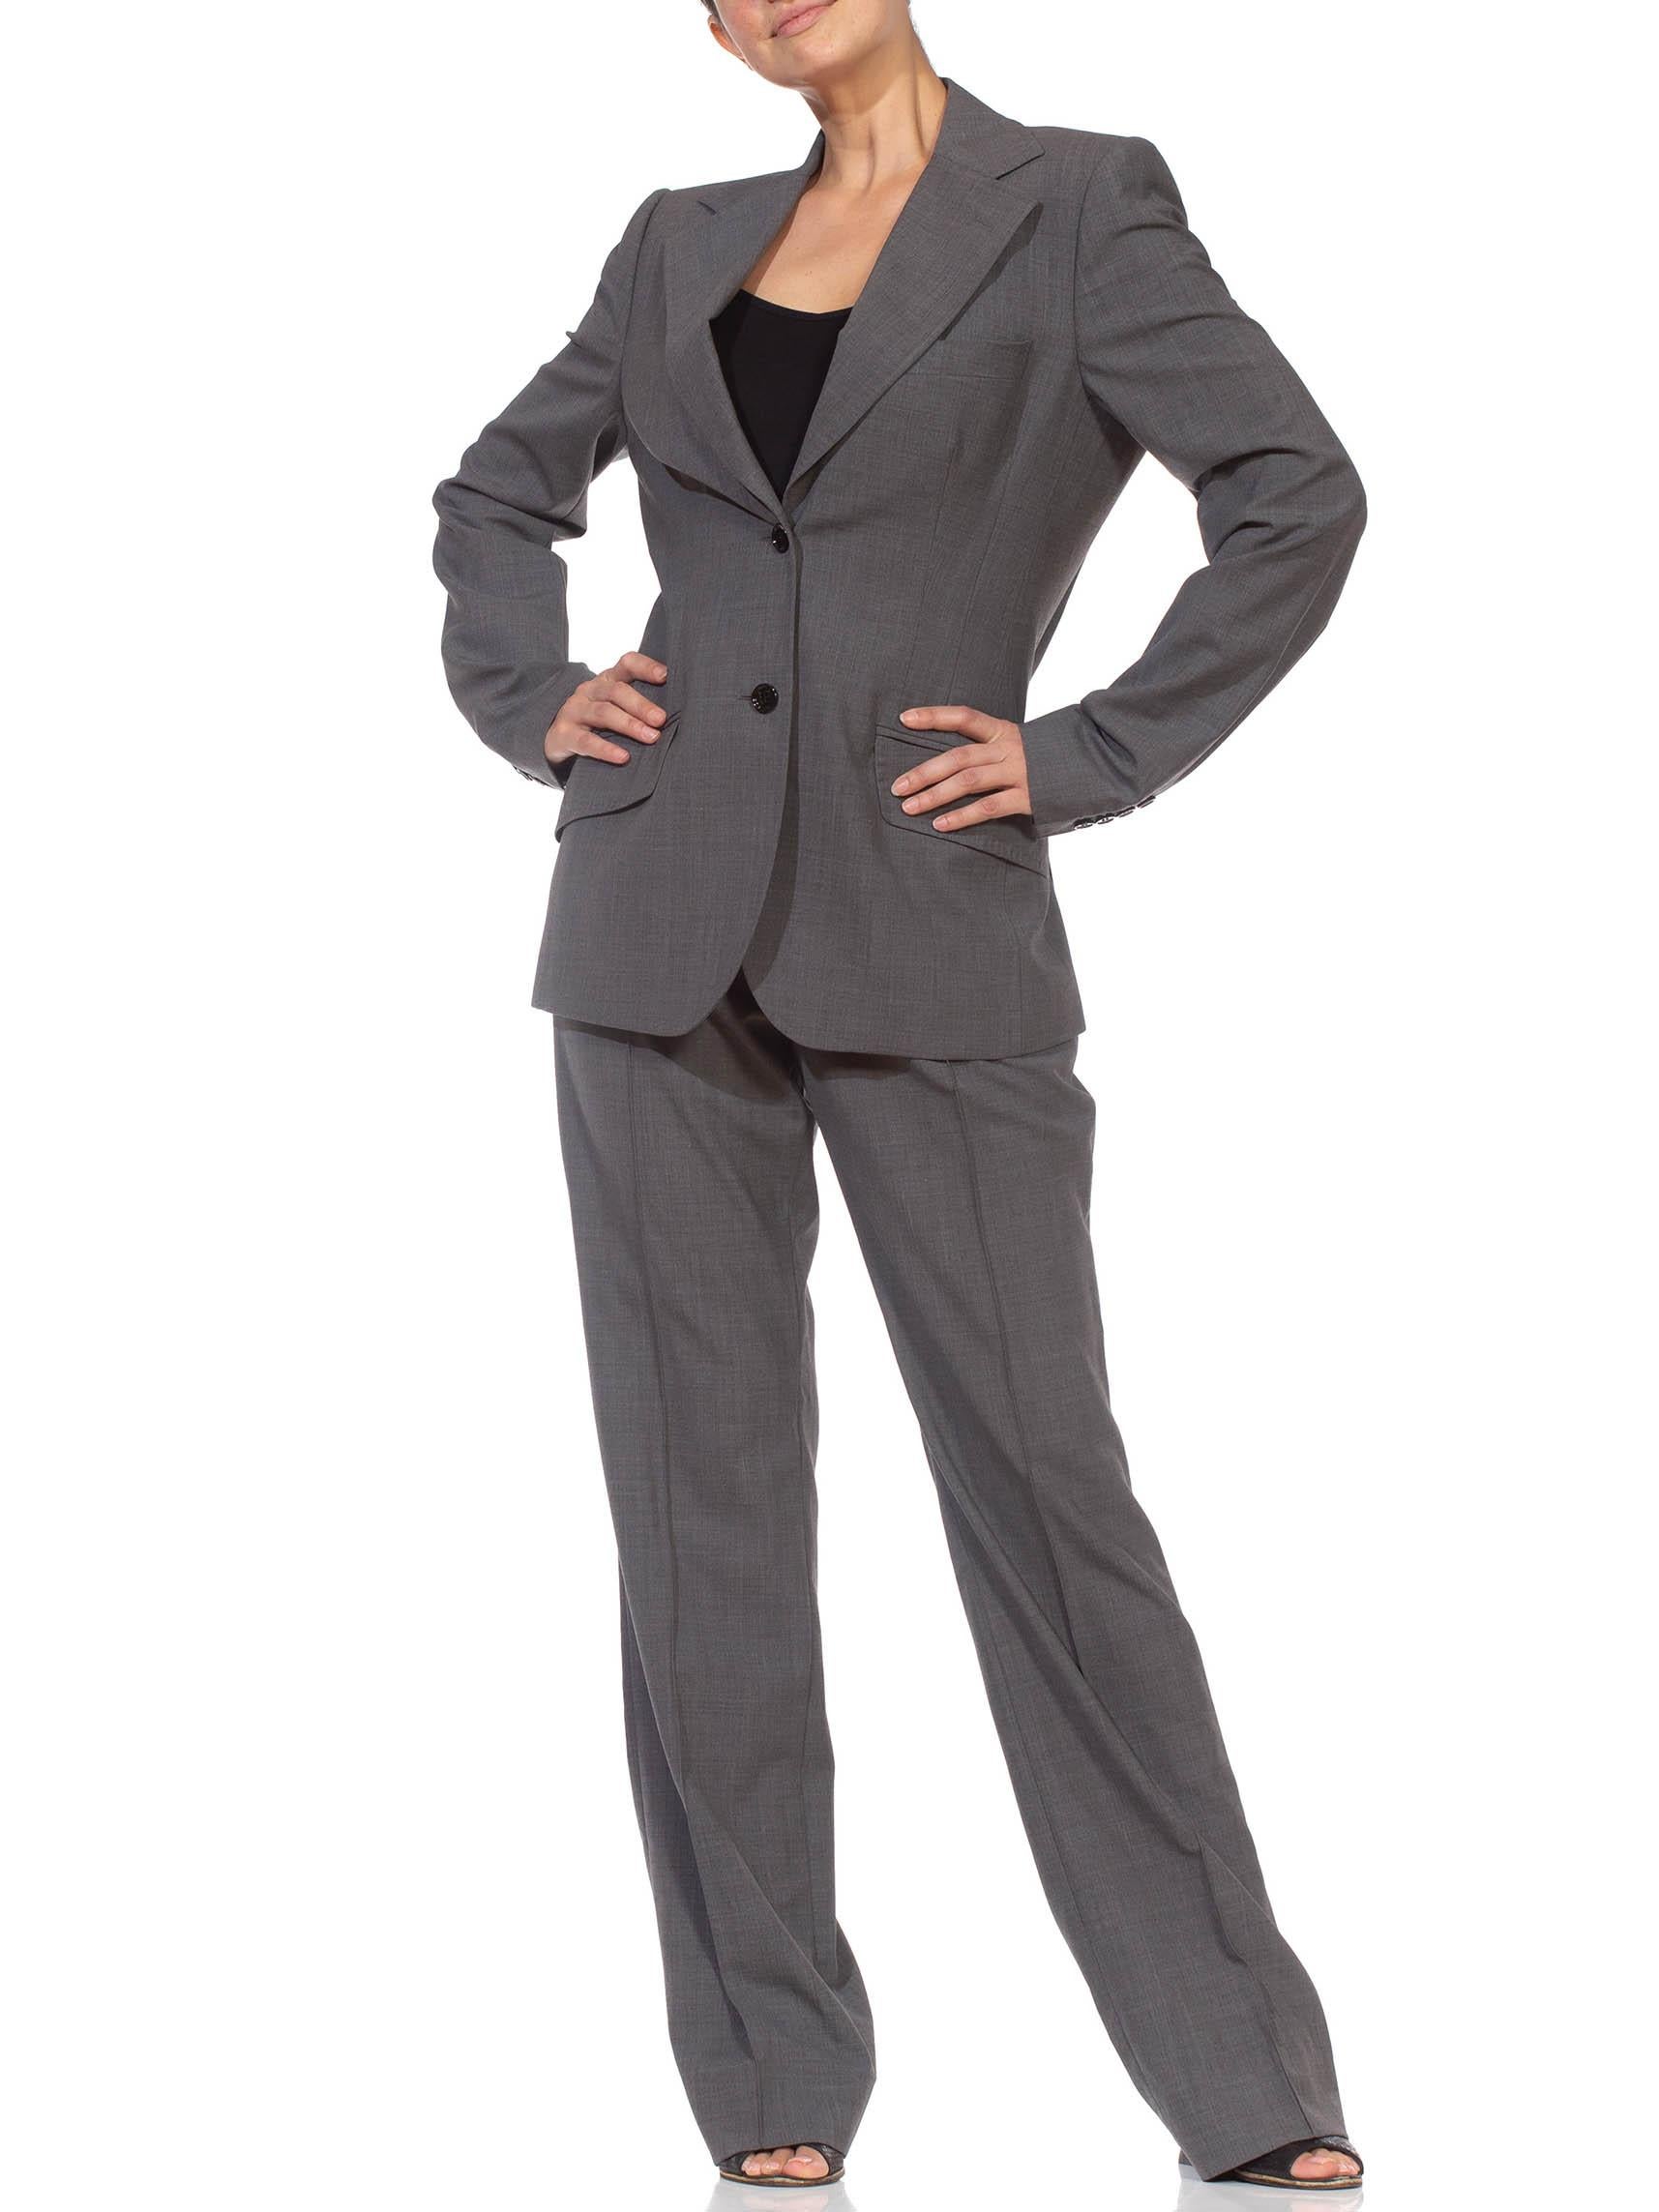 1990S DOLCE & GABBANA Grey Wool Blend Single Breasted Pant Suit For Sale 4